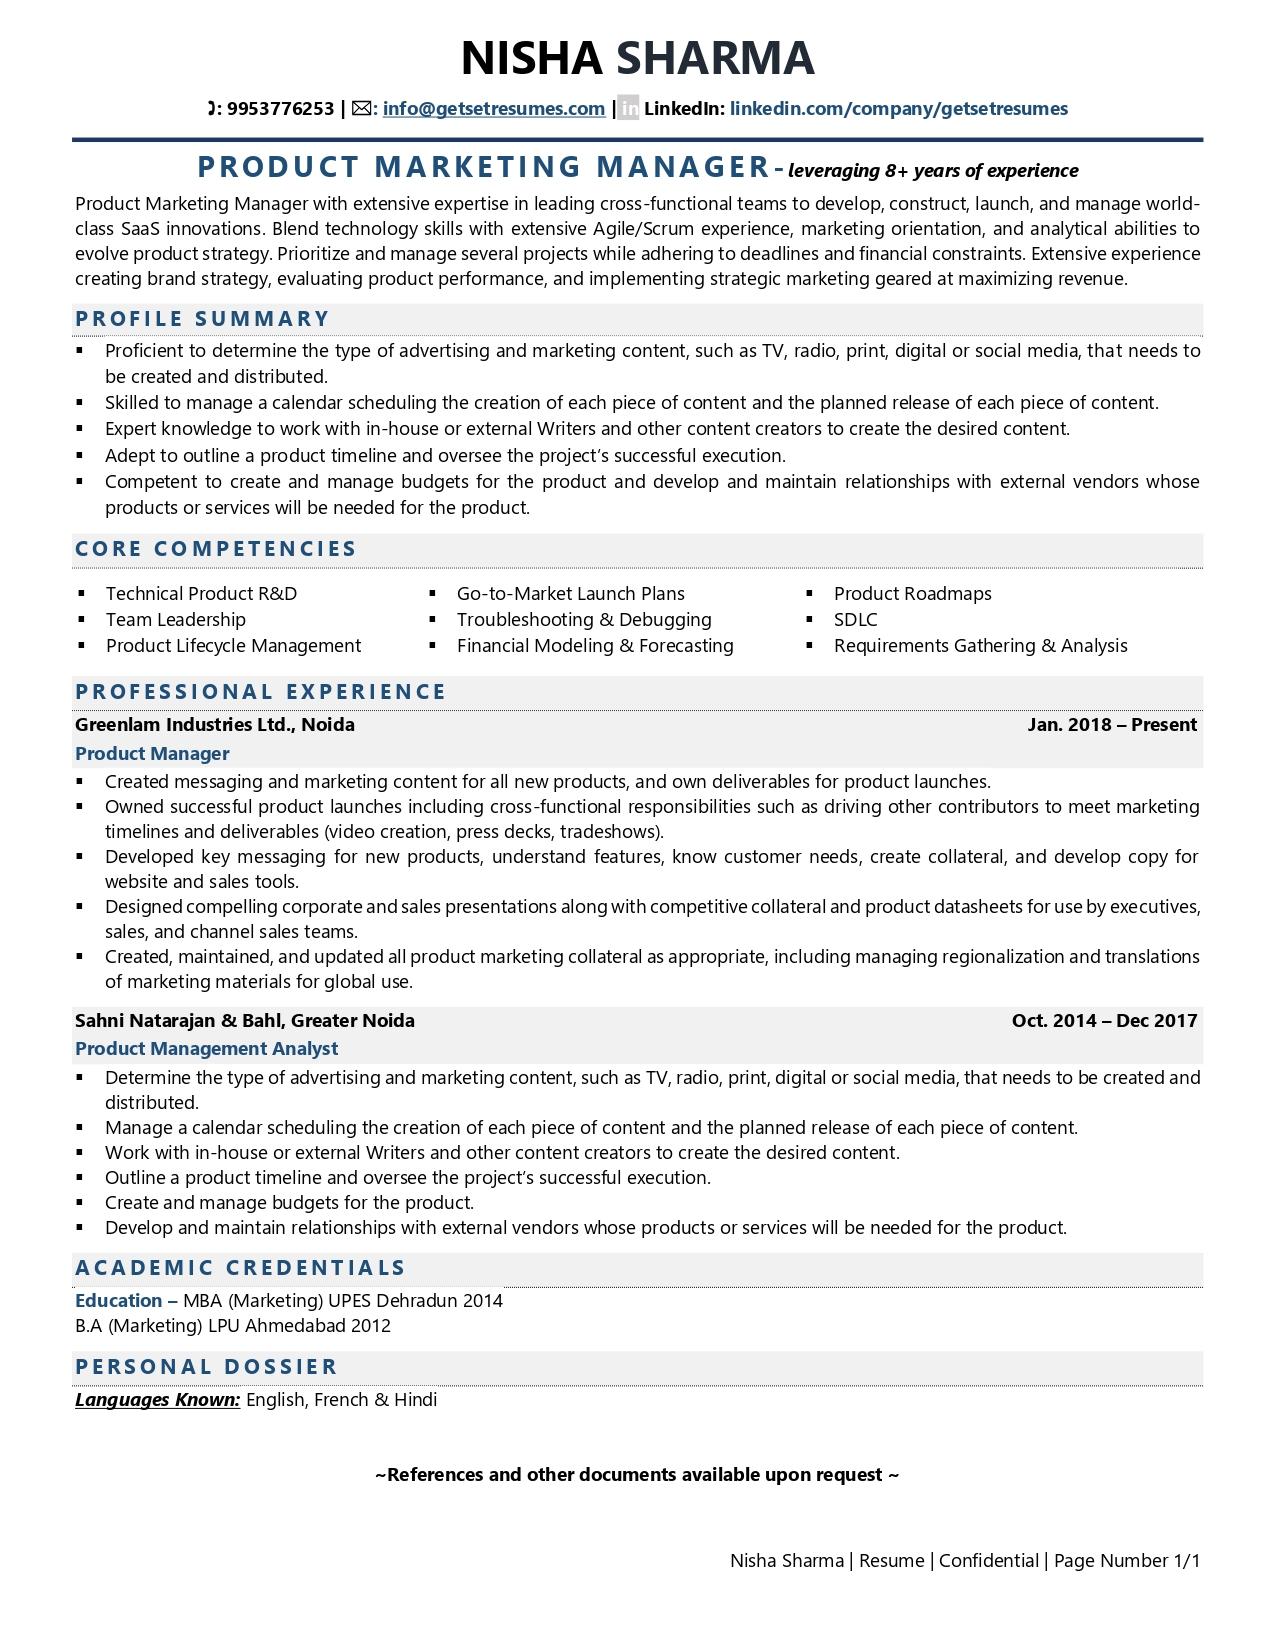 Product Marketing Manager - Resume Example & Template